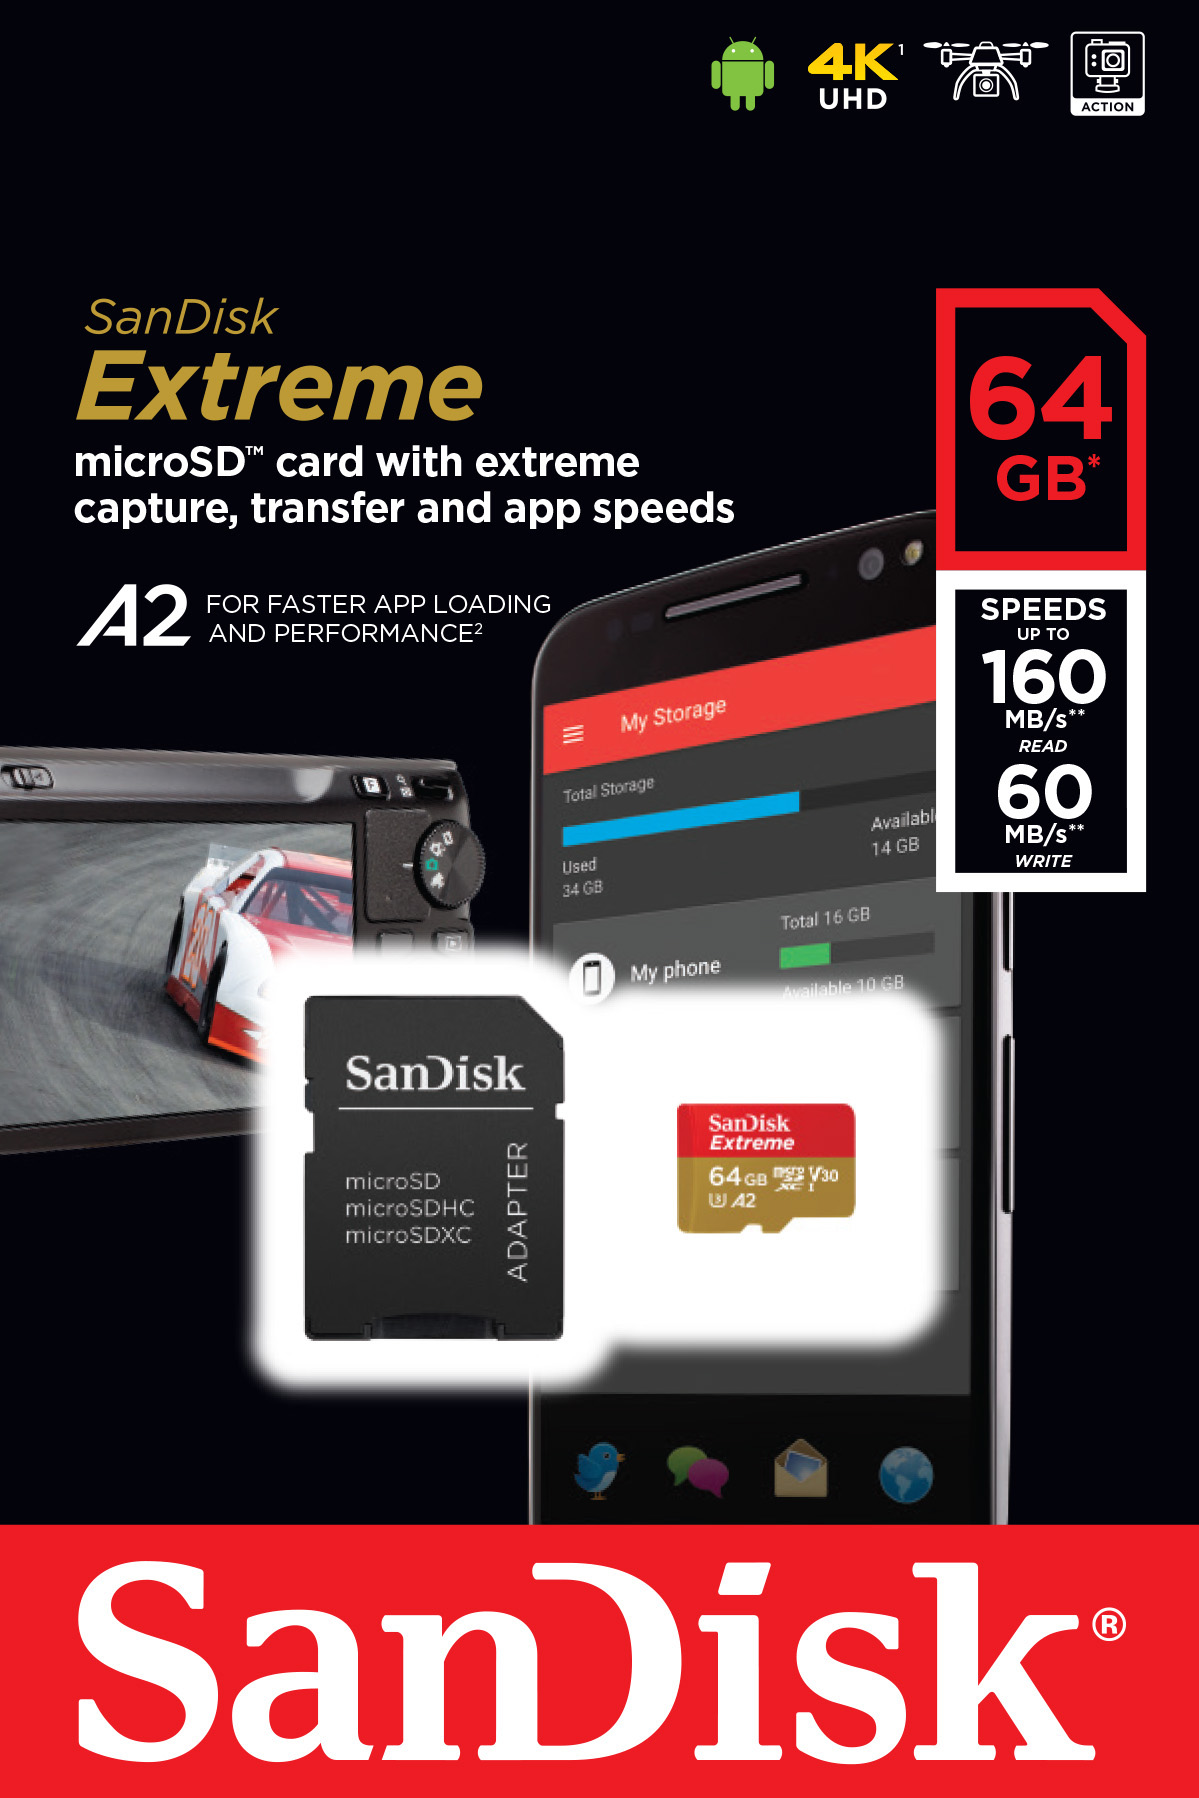 Sandisk microSDXC Card 64GB, Extreme, U3, A2, 4K UHD (R) 160MB/s, (W) 60MB/s, SD Adapter, Retail-Blister